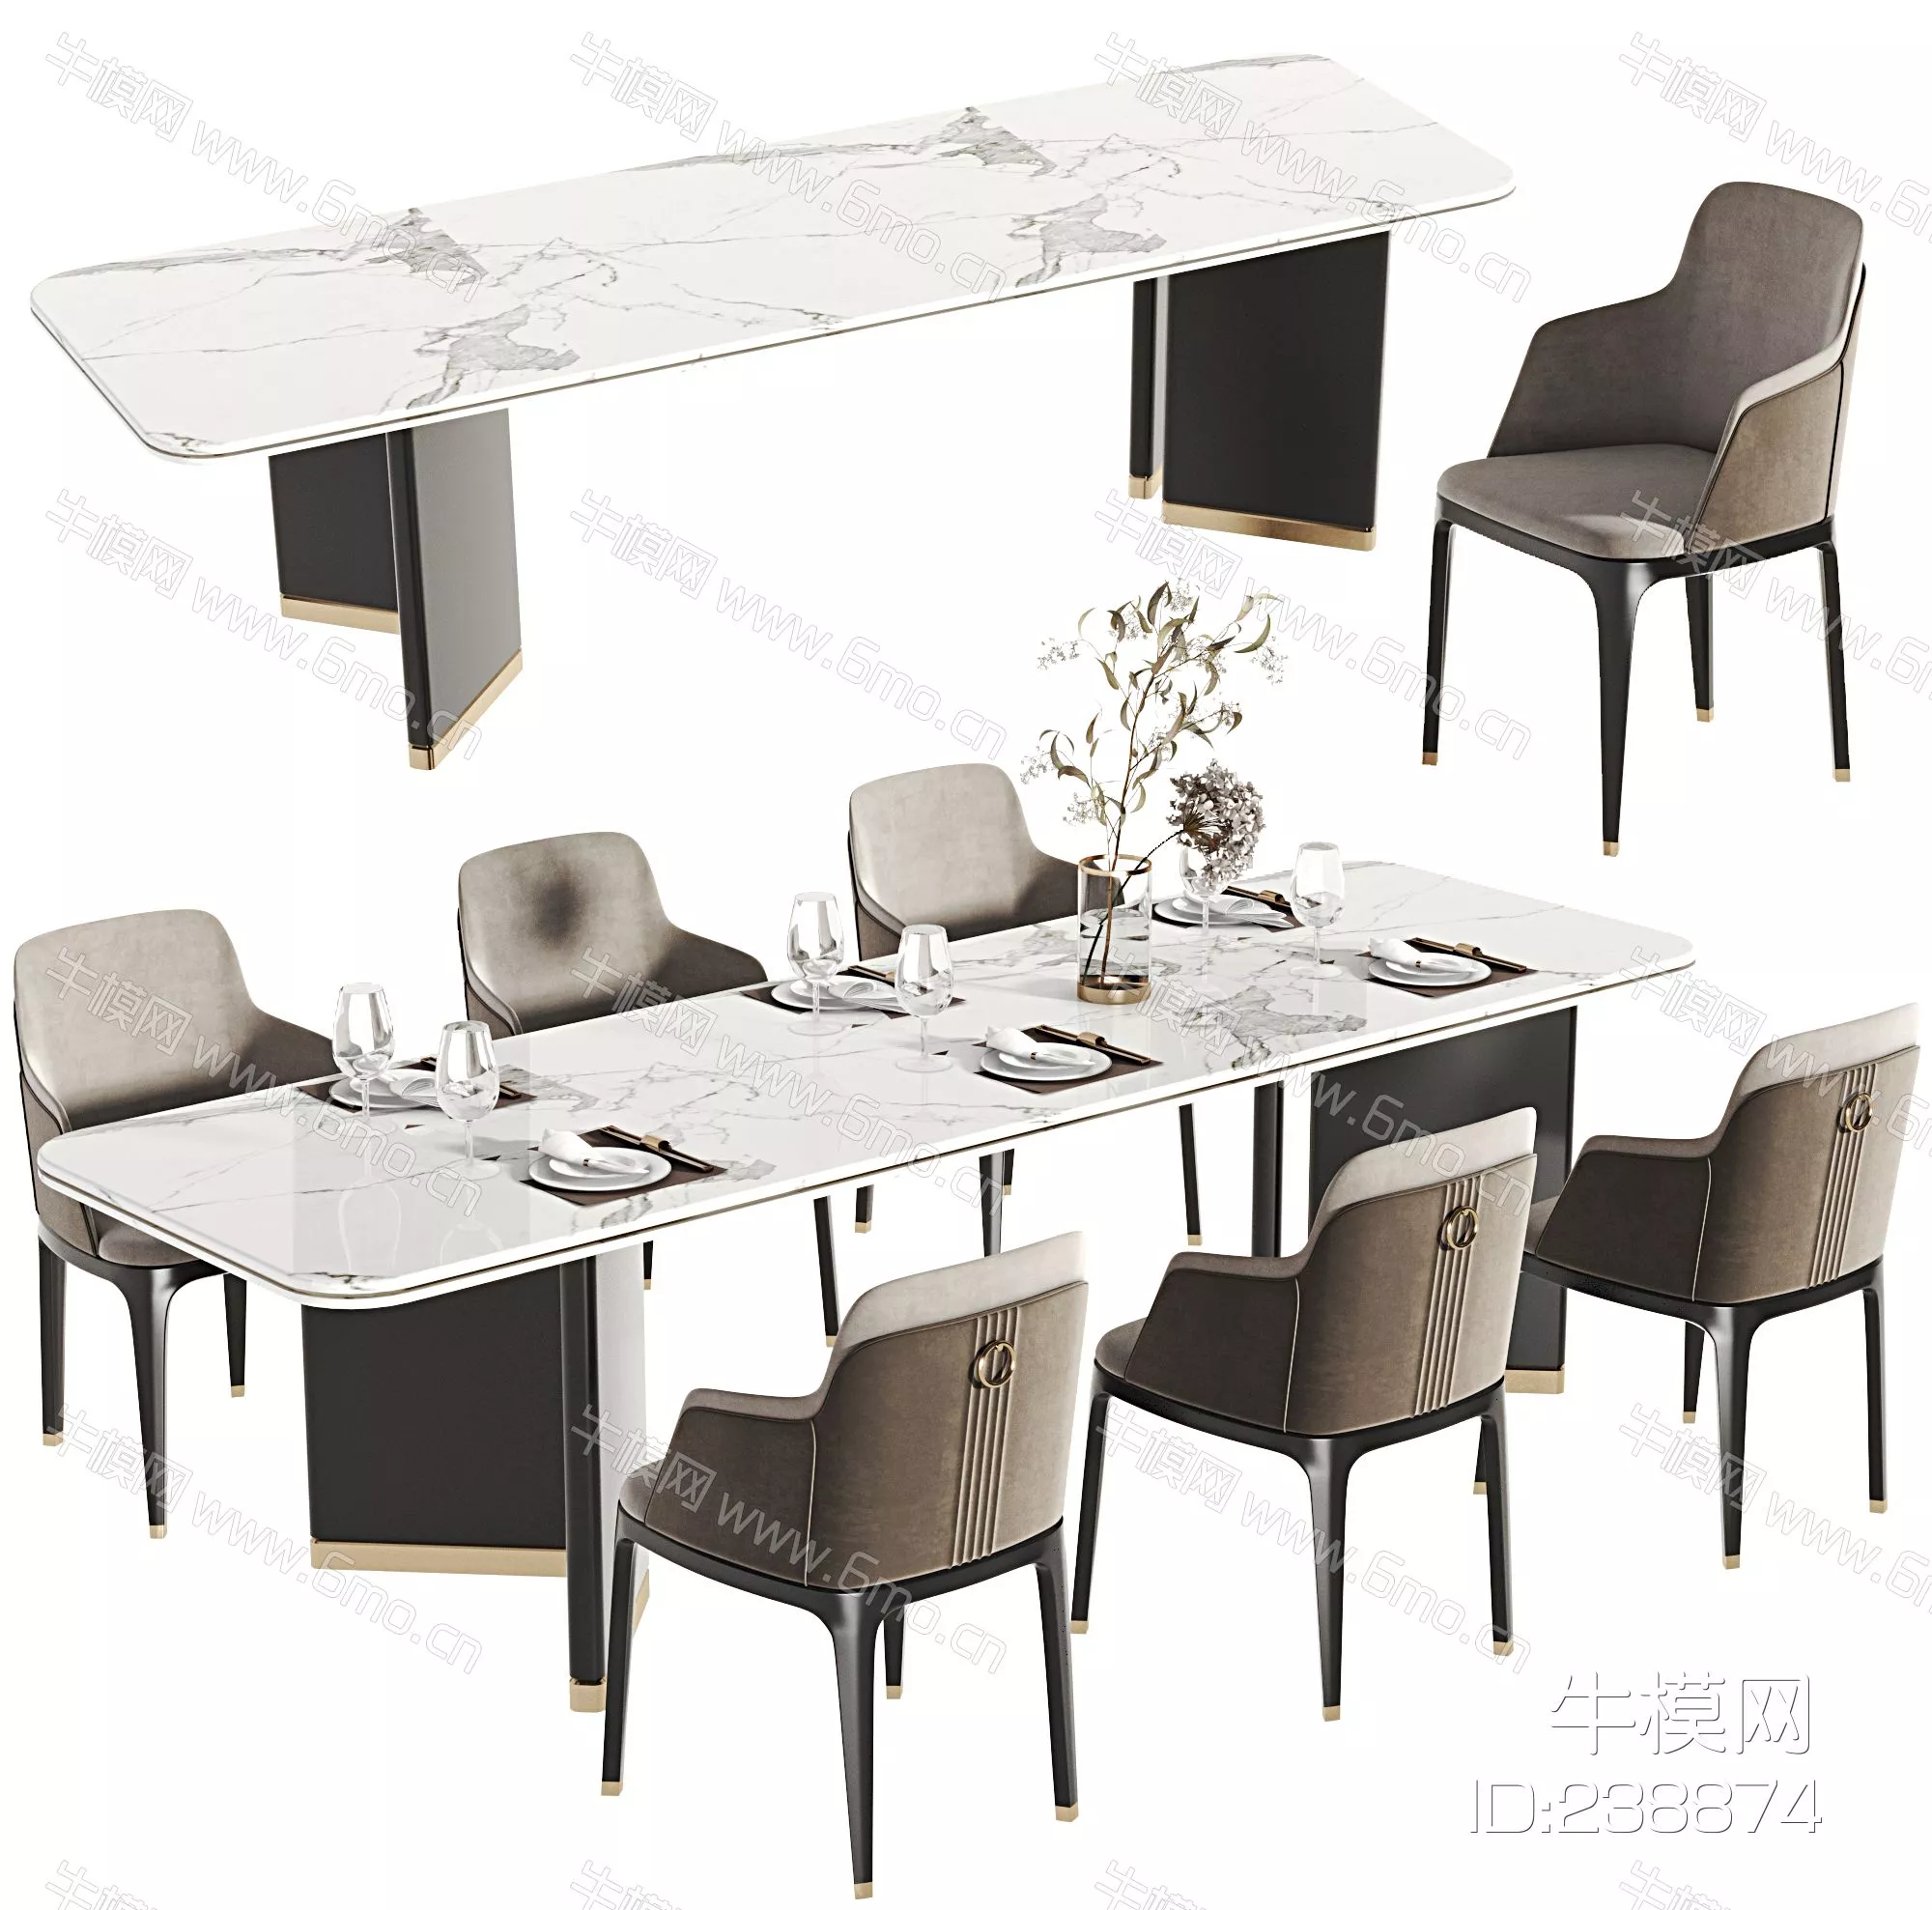 CHINESE DINING TABLE SET - SKETCHUP 3D MODEL - VRAY - 238874